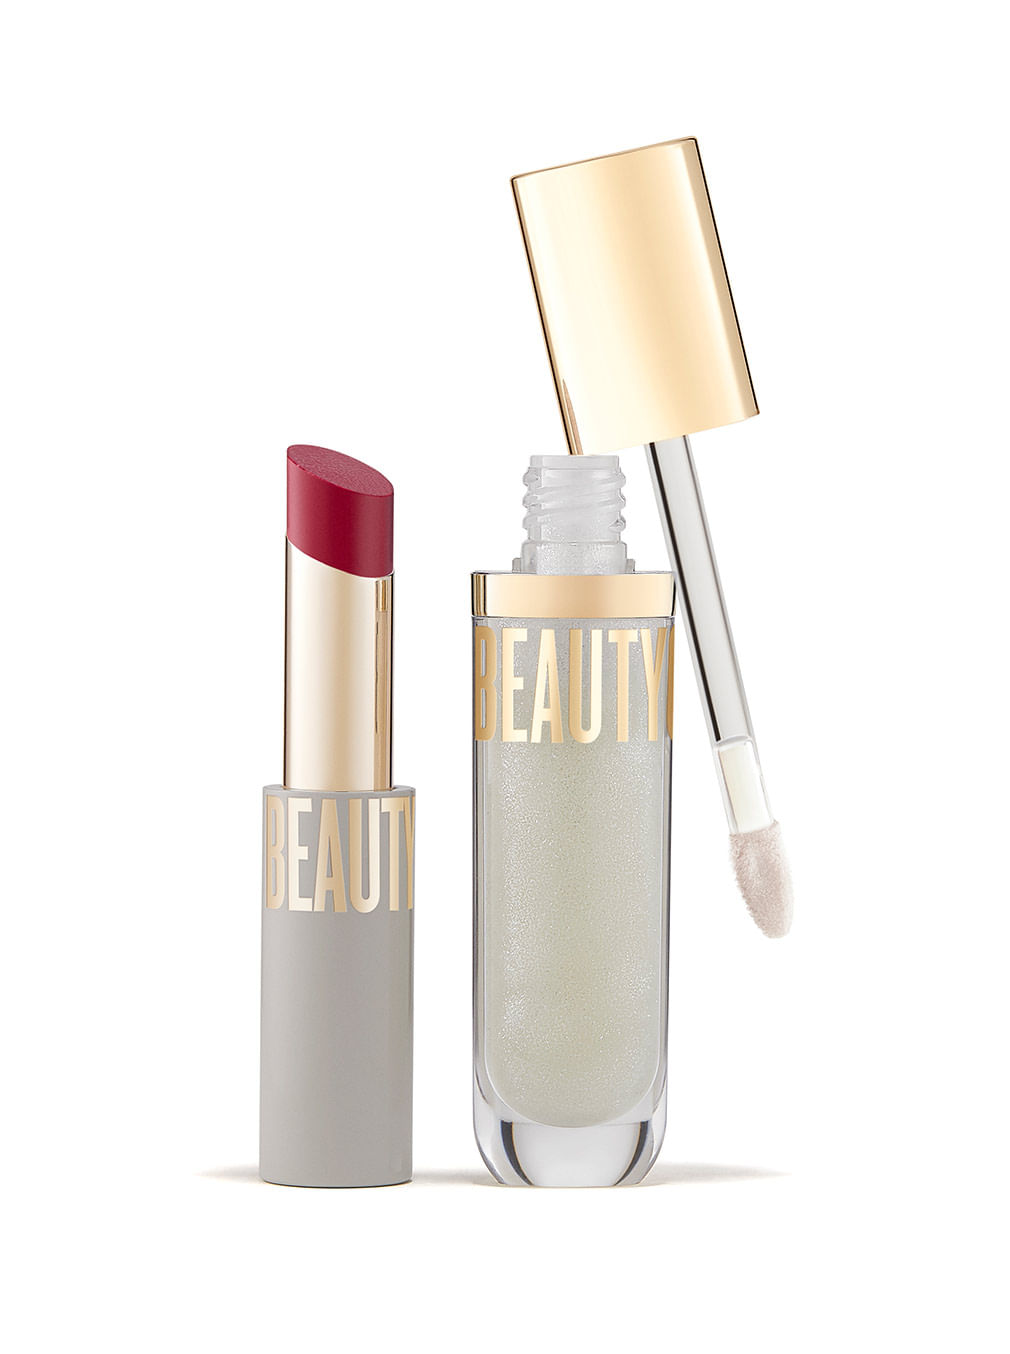 Sheer Genius Conditioning Lipstick - Beautycounter - Skin Care, Makeup,  Bath and Body and more!